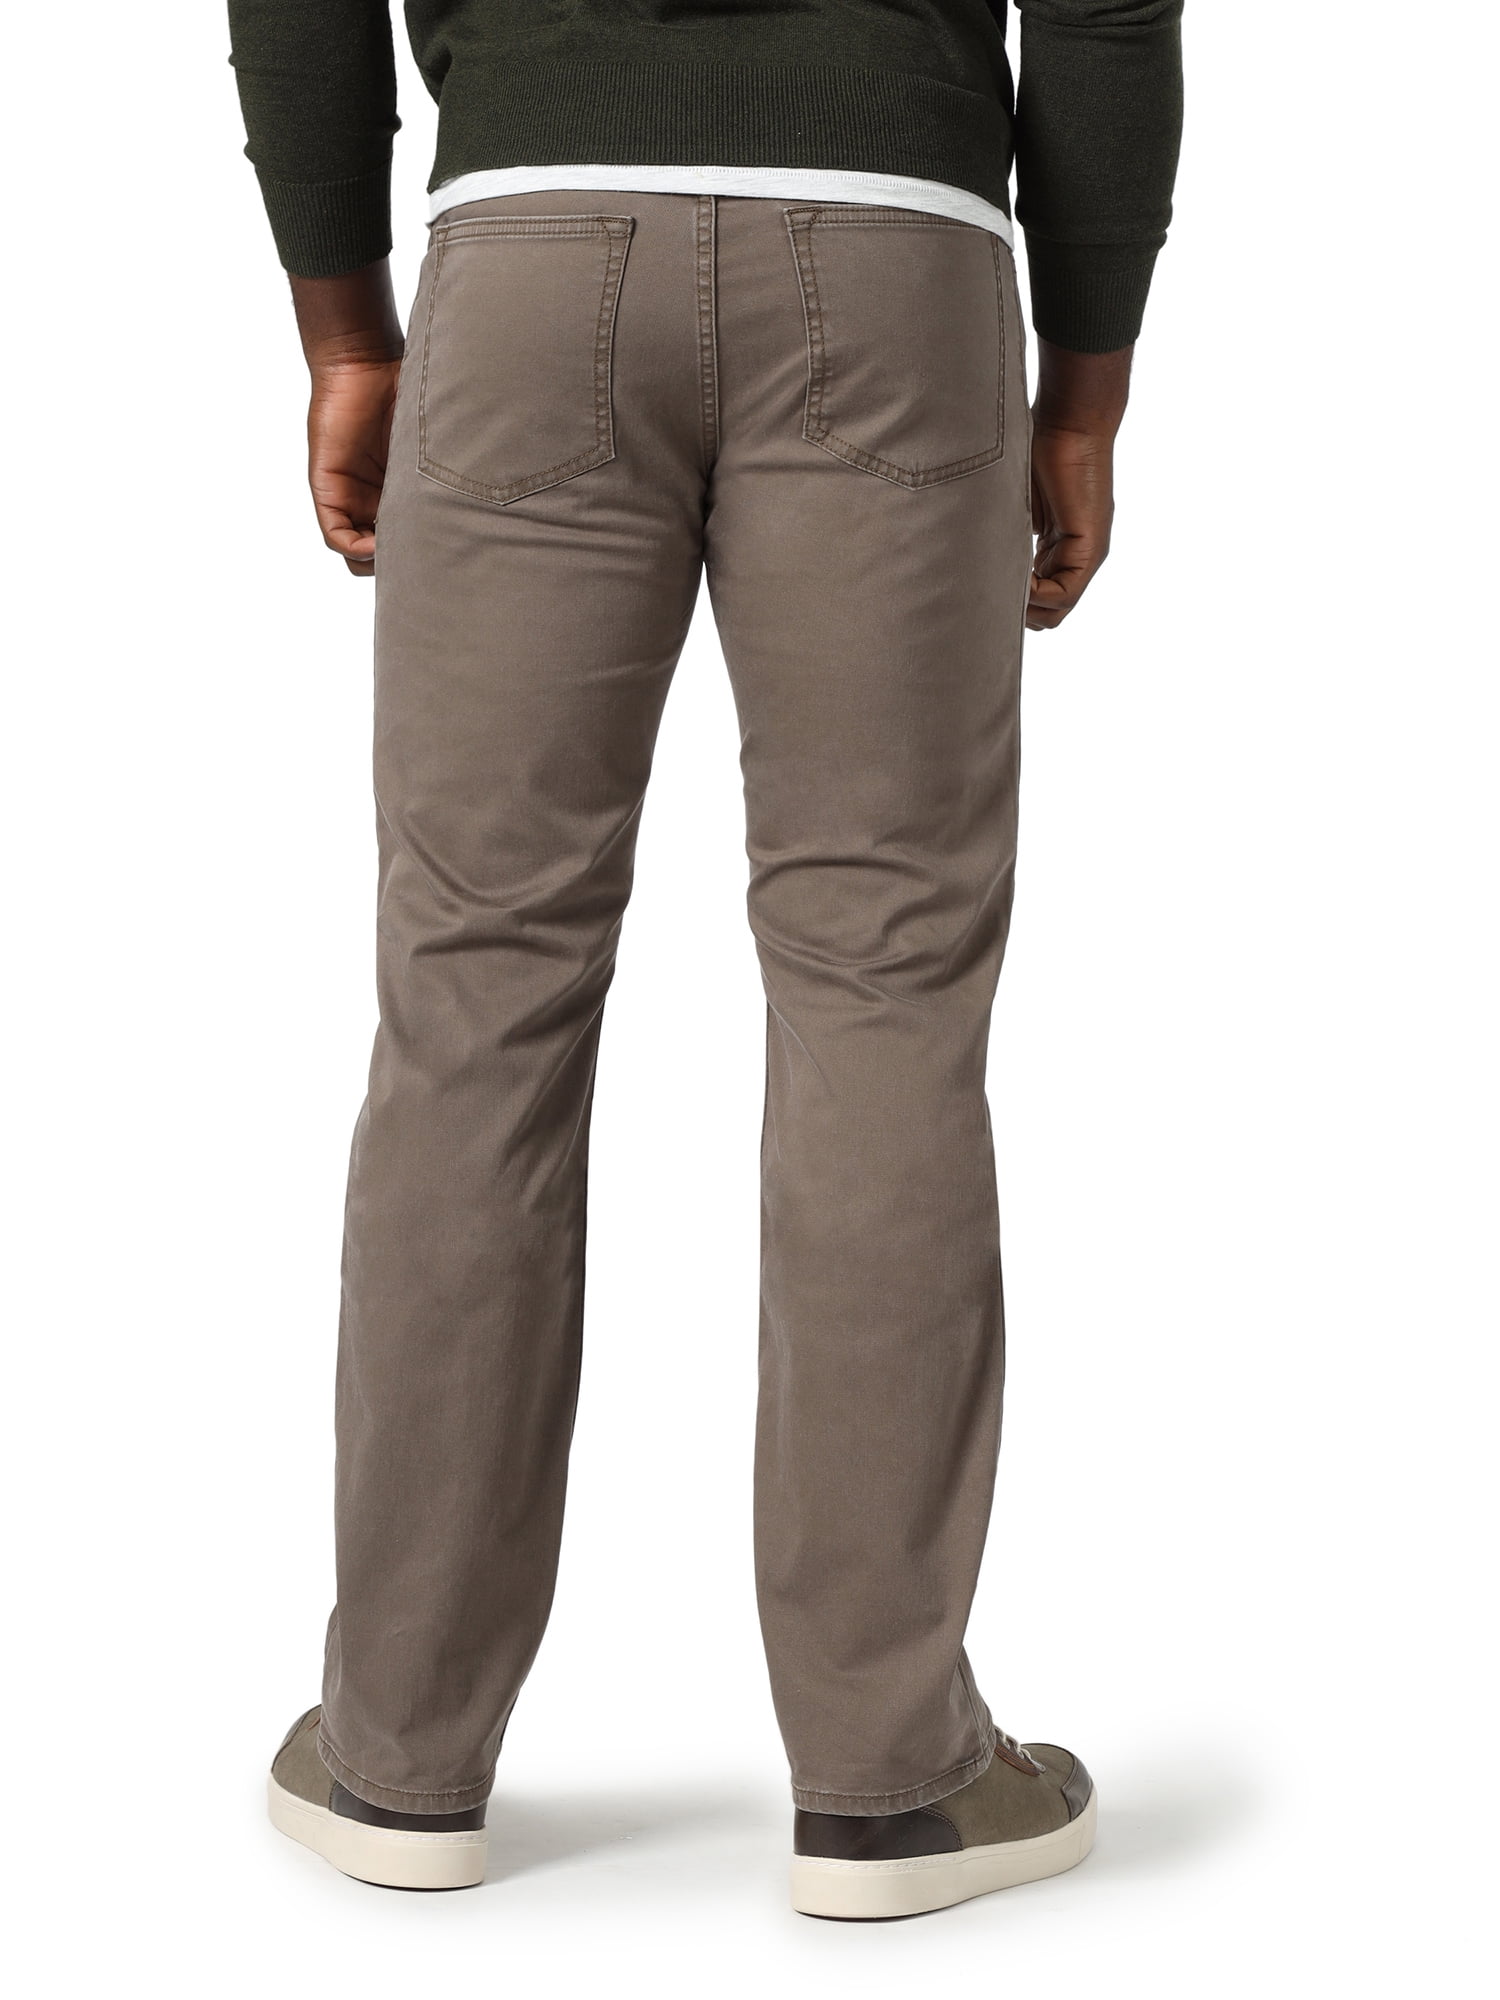 Wrangler Men's Stretch Straight Fit Twill Pant 